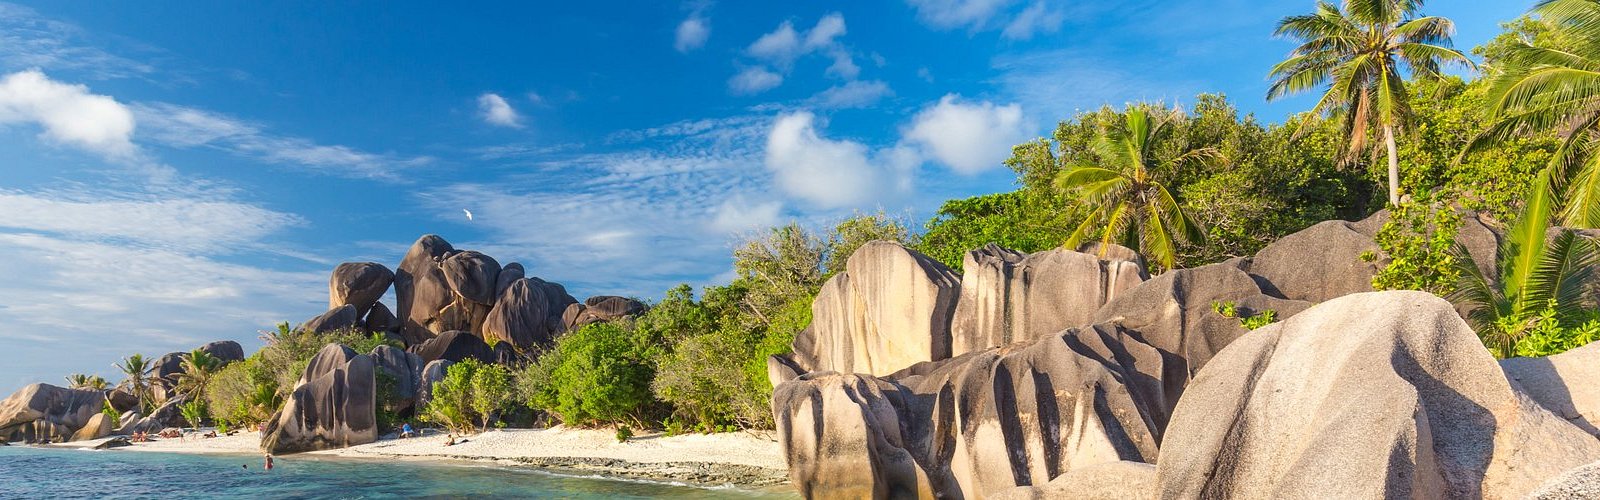 THE 10 BEST Hotels in La Digue Island for 2023 (from $88) - Tripadvisor